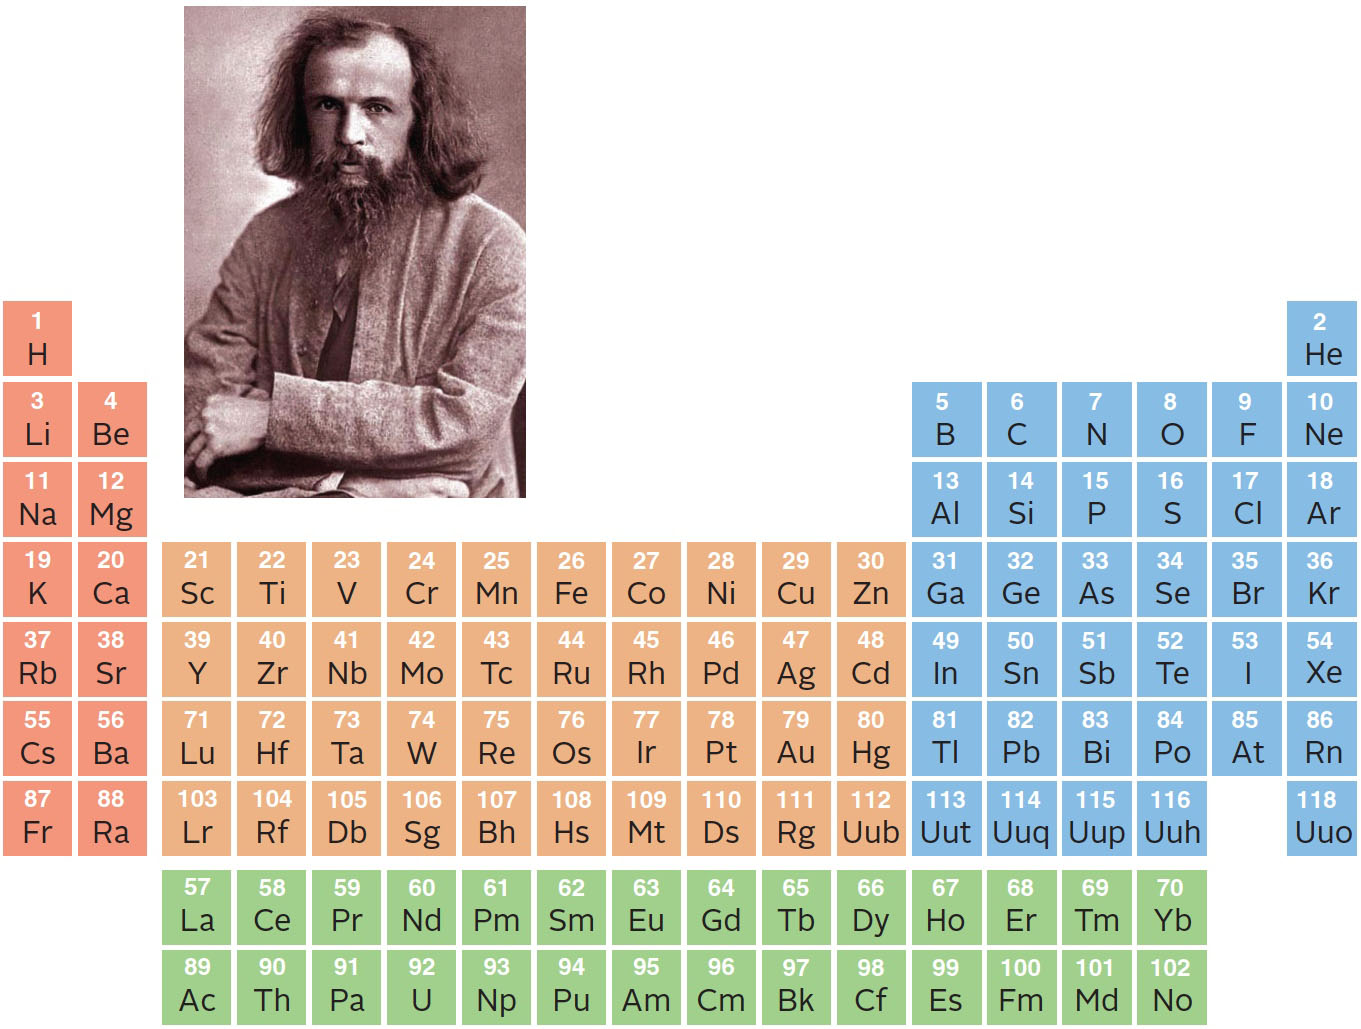 The periodic table and its creator, Dmitry Mendeleyev.